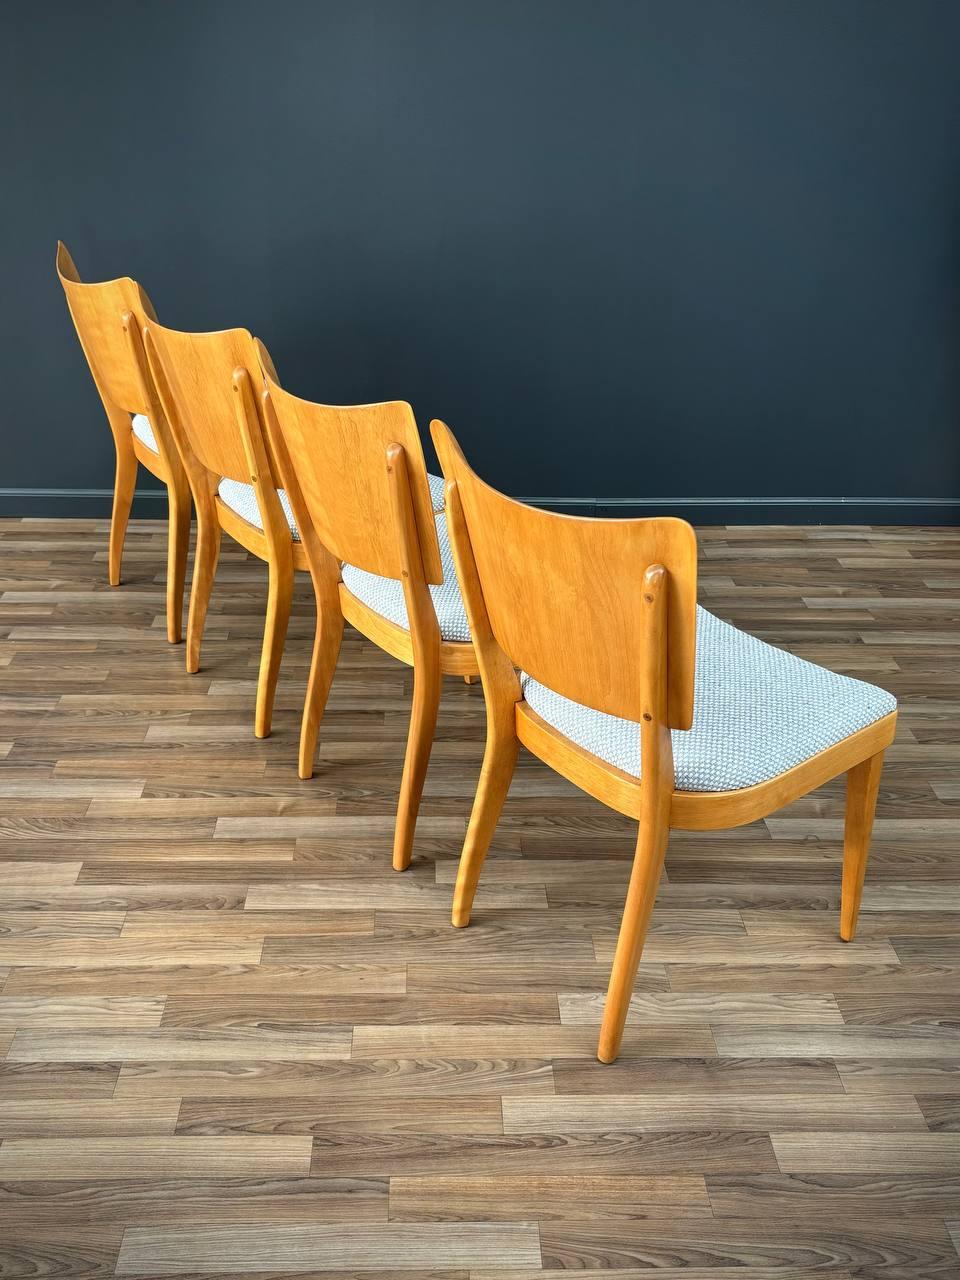 Mid-20th Century Set of 4 Mid-Century Modern Dining Chairs by Heywood Wakefield For Sale